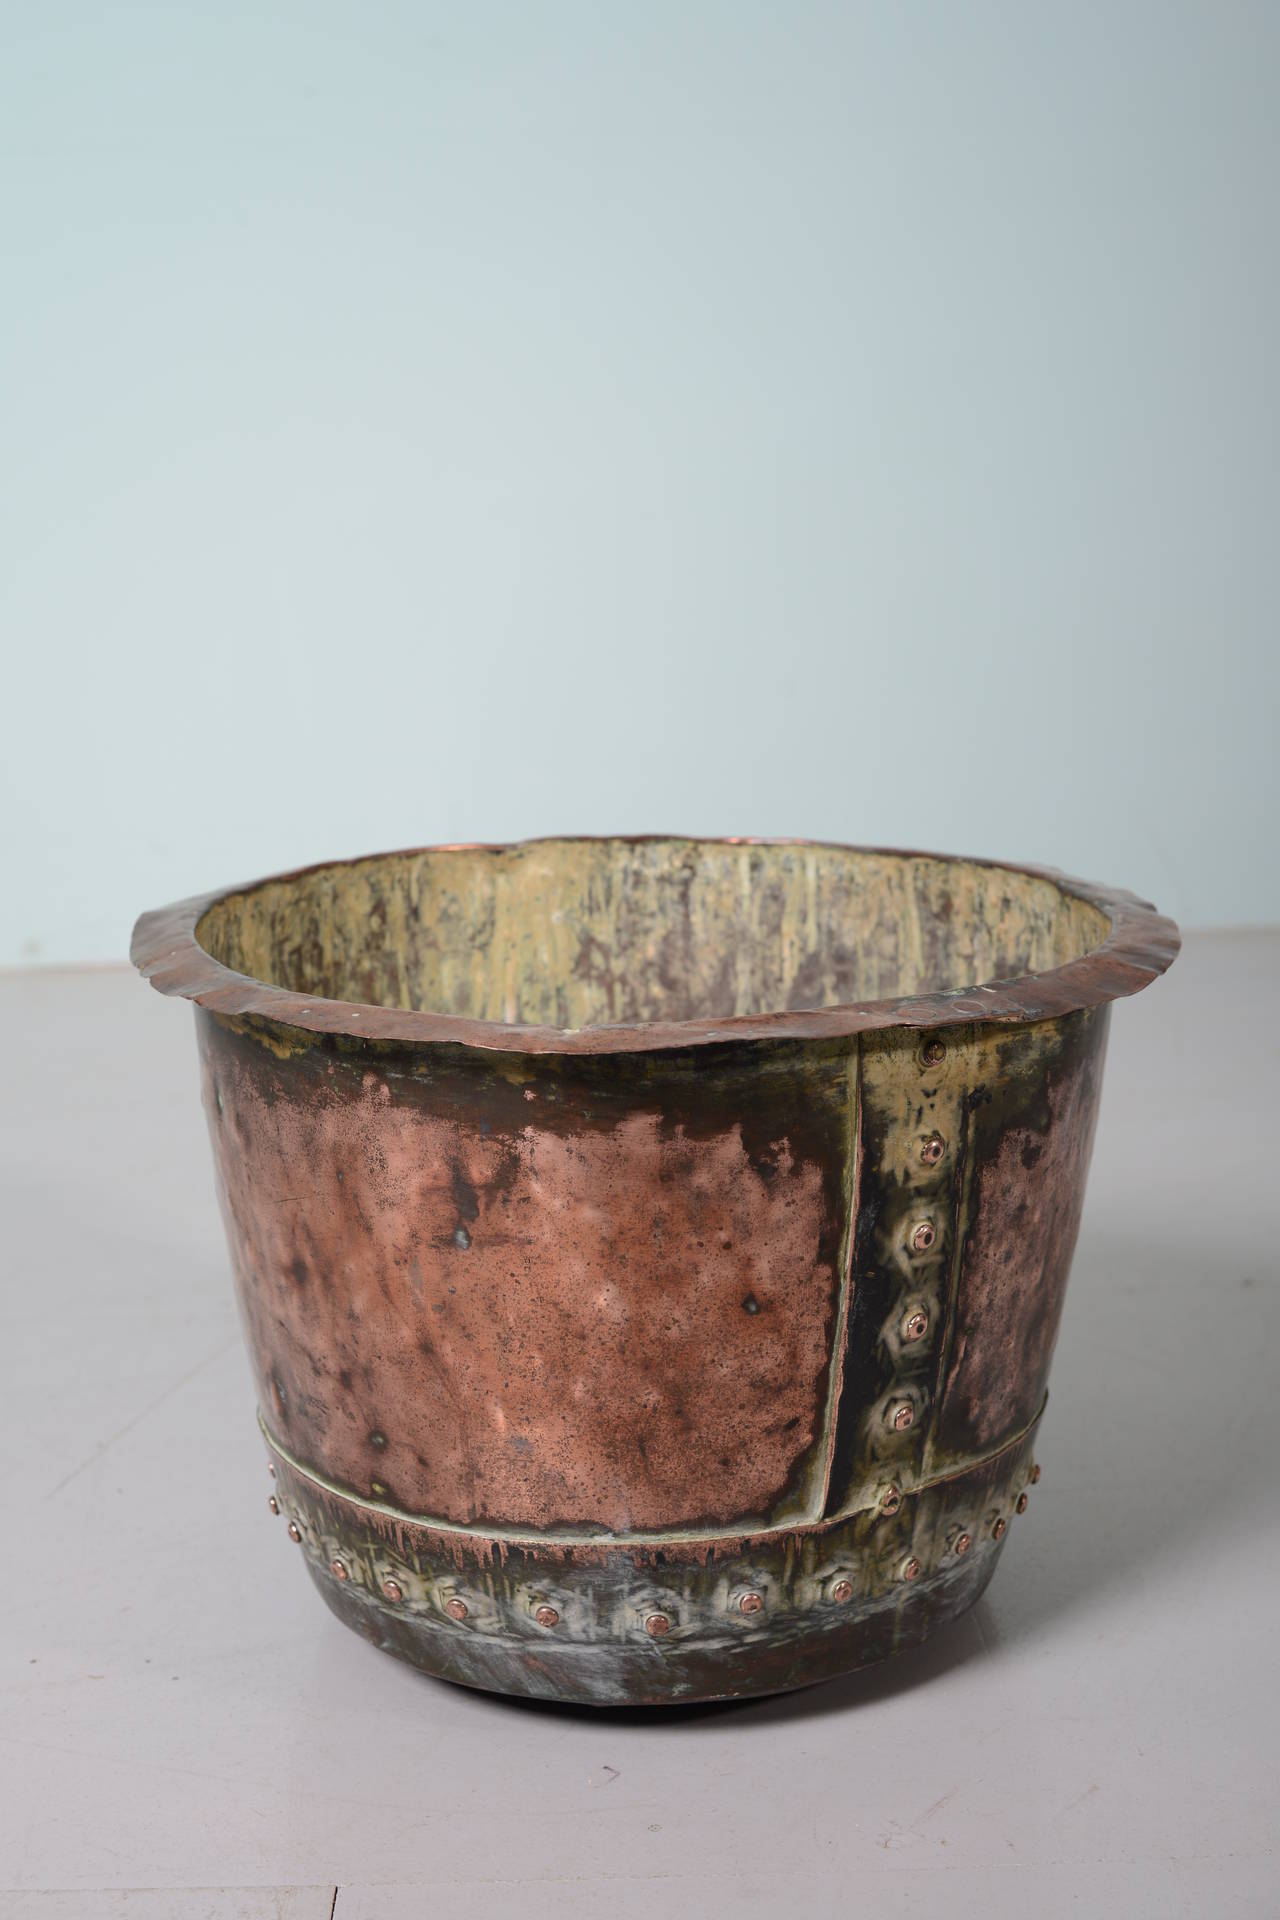 19th Century Antique Copper Vessel.
This is a lovely sized antique copper vessel that is perfect to use for logs or coal by the fire.
Equally as a waste paper bin in the office.
In very good solid condition, rivetted construction, dating from